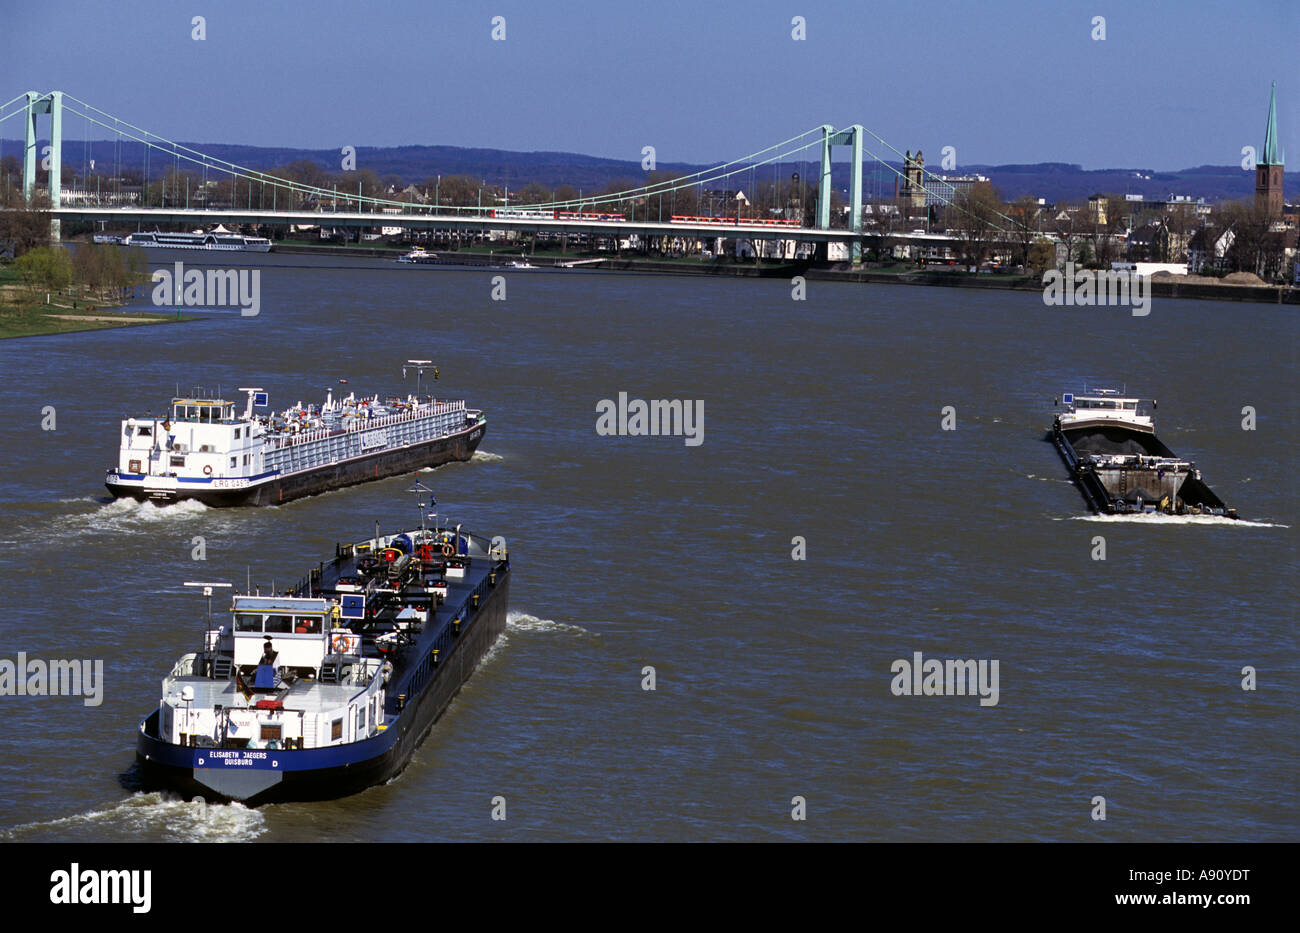 Oil, gas and coal barges on the river Rhine, Cologne, North Rhine-Westphalia, Germany. Stock Photo